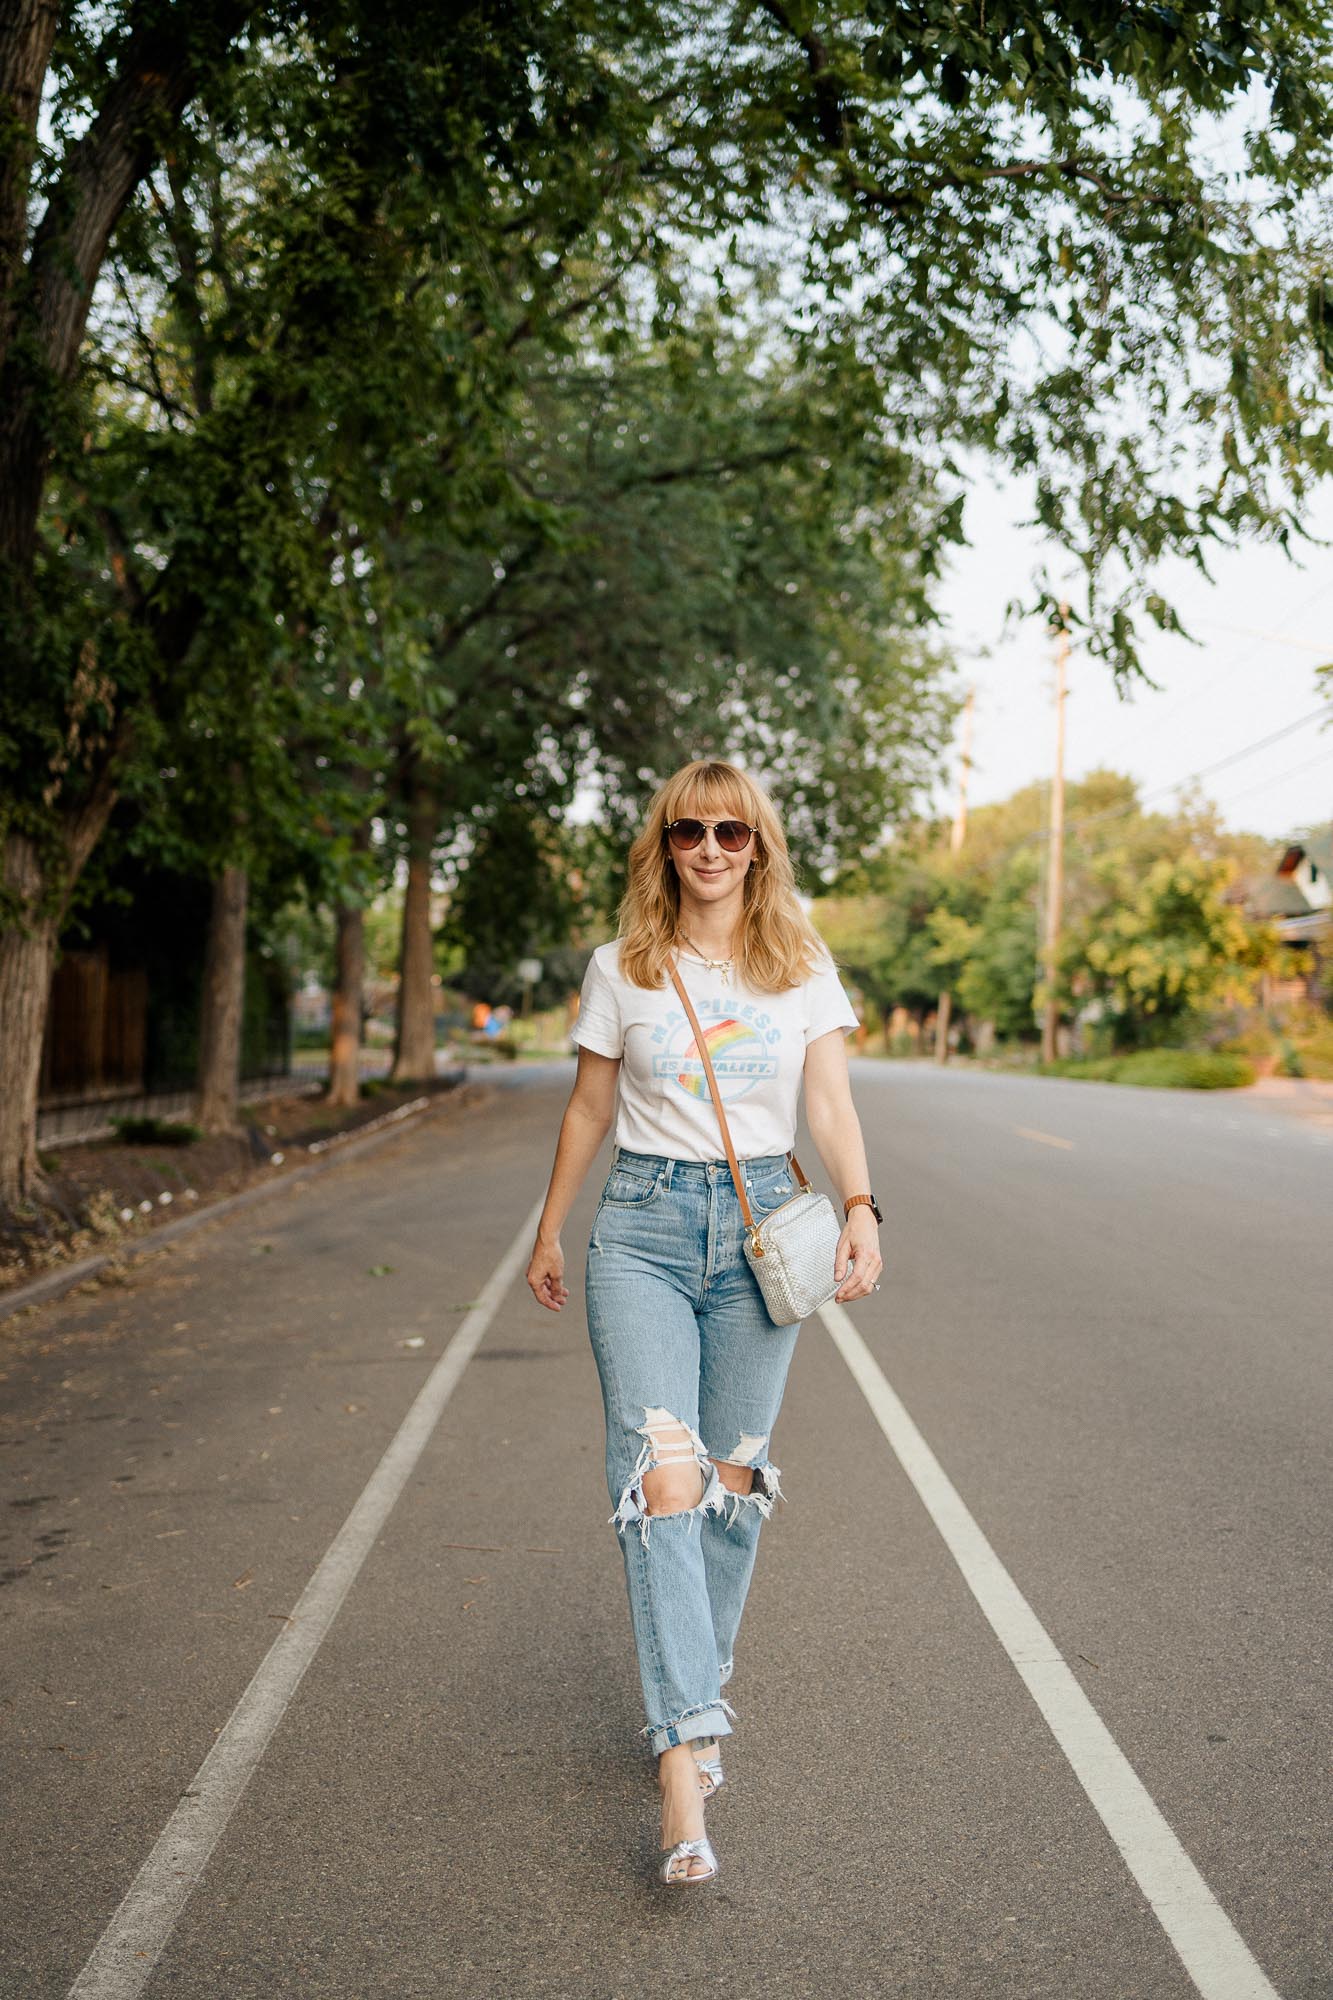 Walking down the street wearing Agolde 90s jeans, a Redone tee, Veronica Beard silver granita heels, and a silver Clare V crossbody bag.